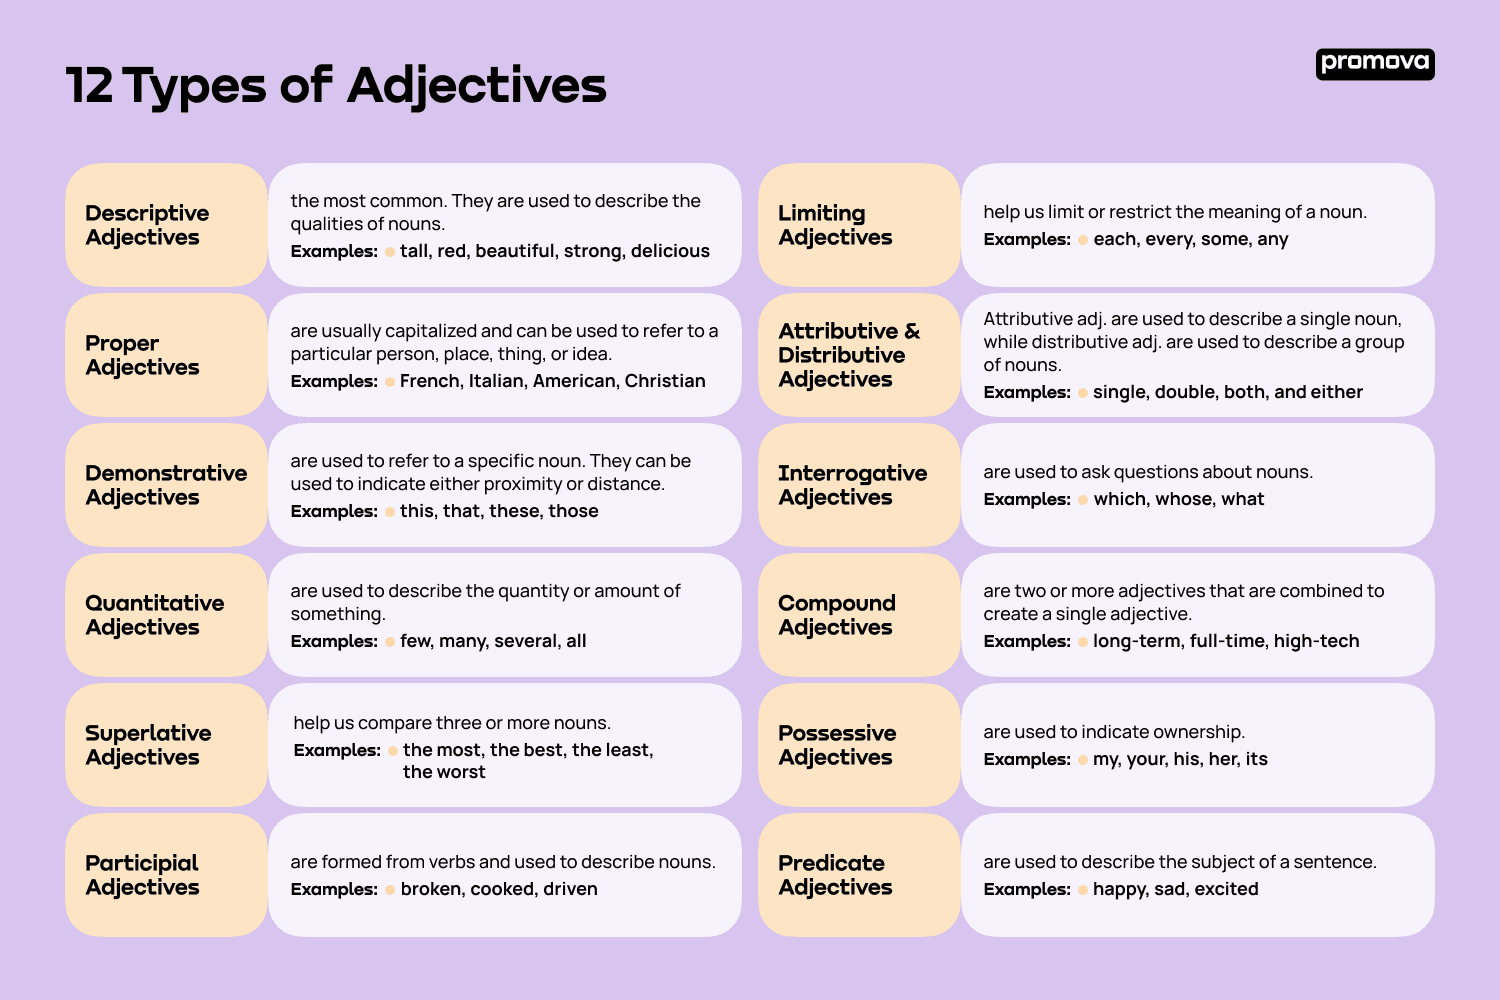 Types of Adjectives in English